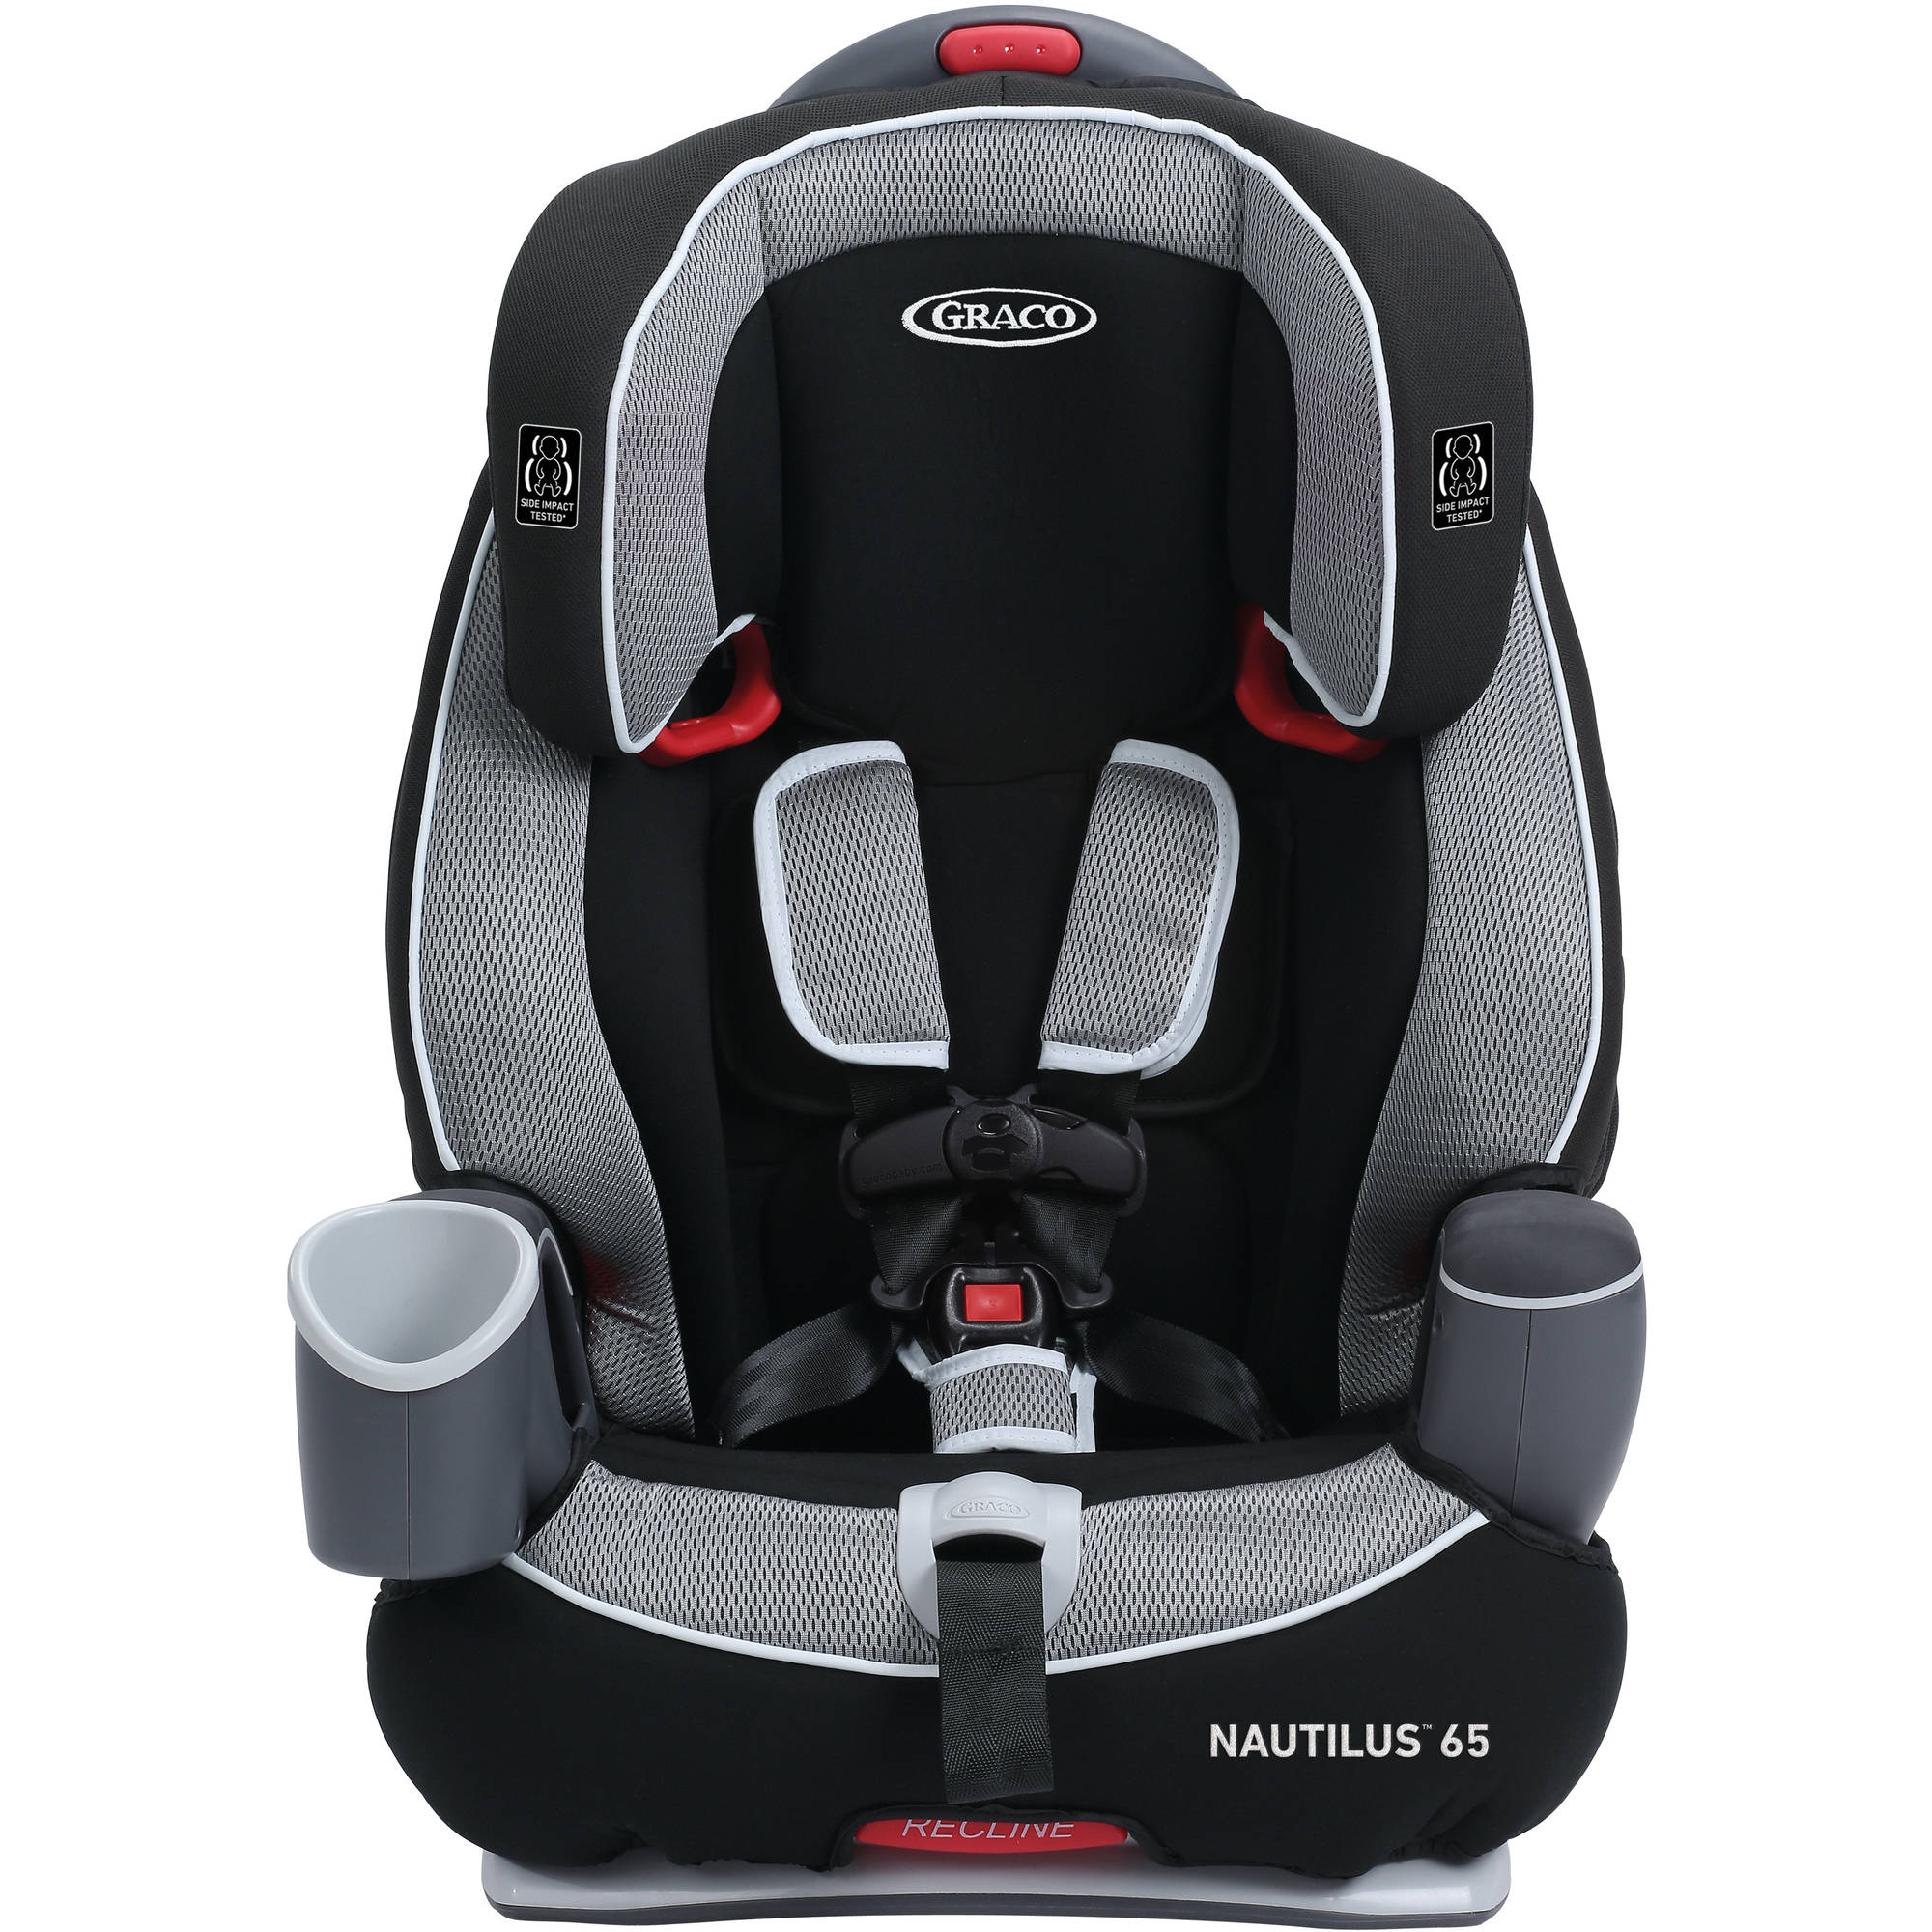 Graco Nautilus 65 3-in-1 Harness Forward Facing Booster Car Seat, Track Black/Gray - image 3 of 4